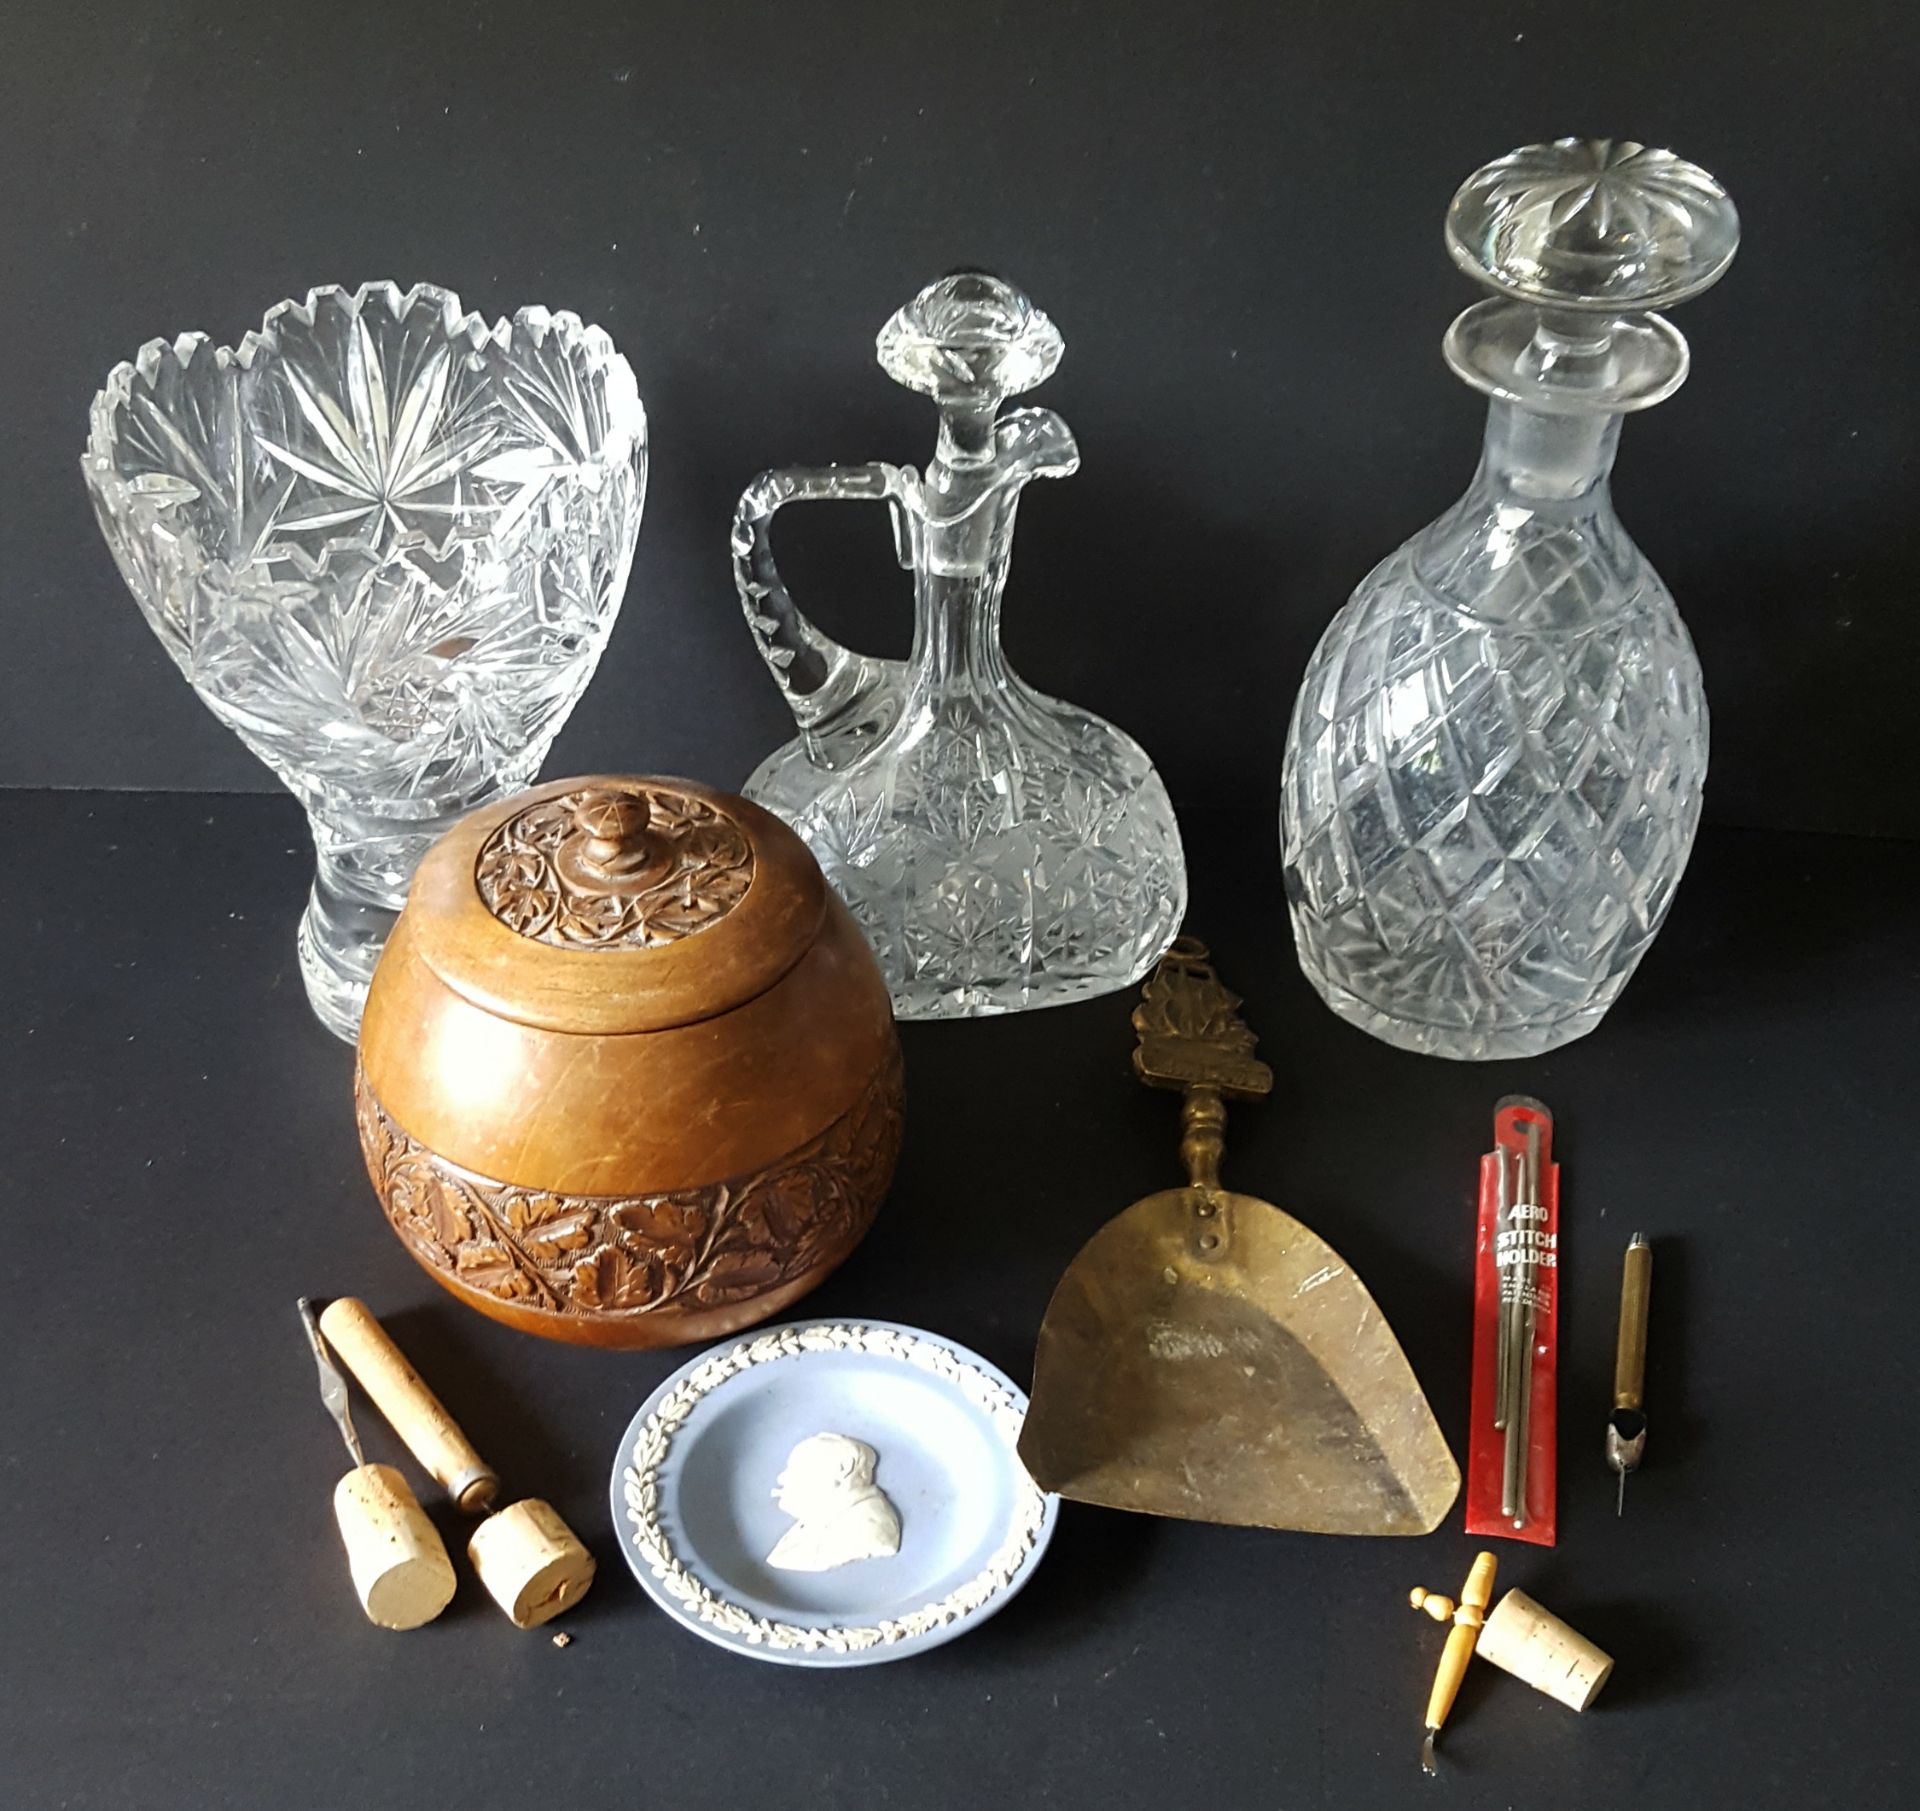 Vintage Retro Parcel of Decanters Wedgwood Brass Lace Work Tools & Treen NO RESERVE